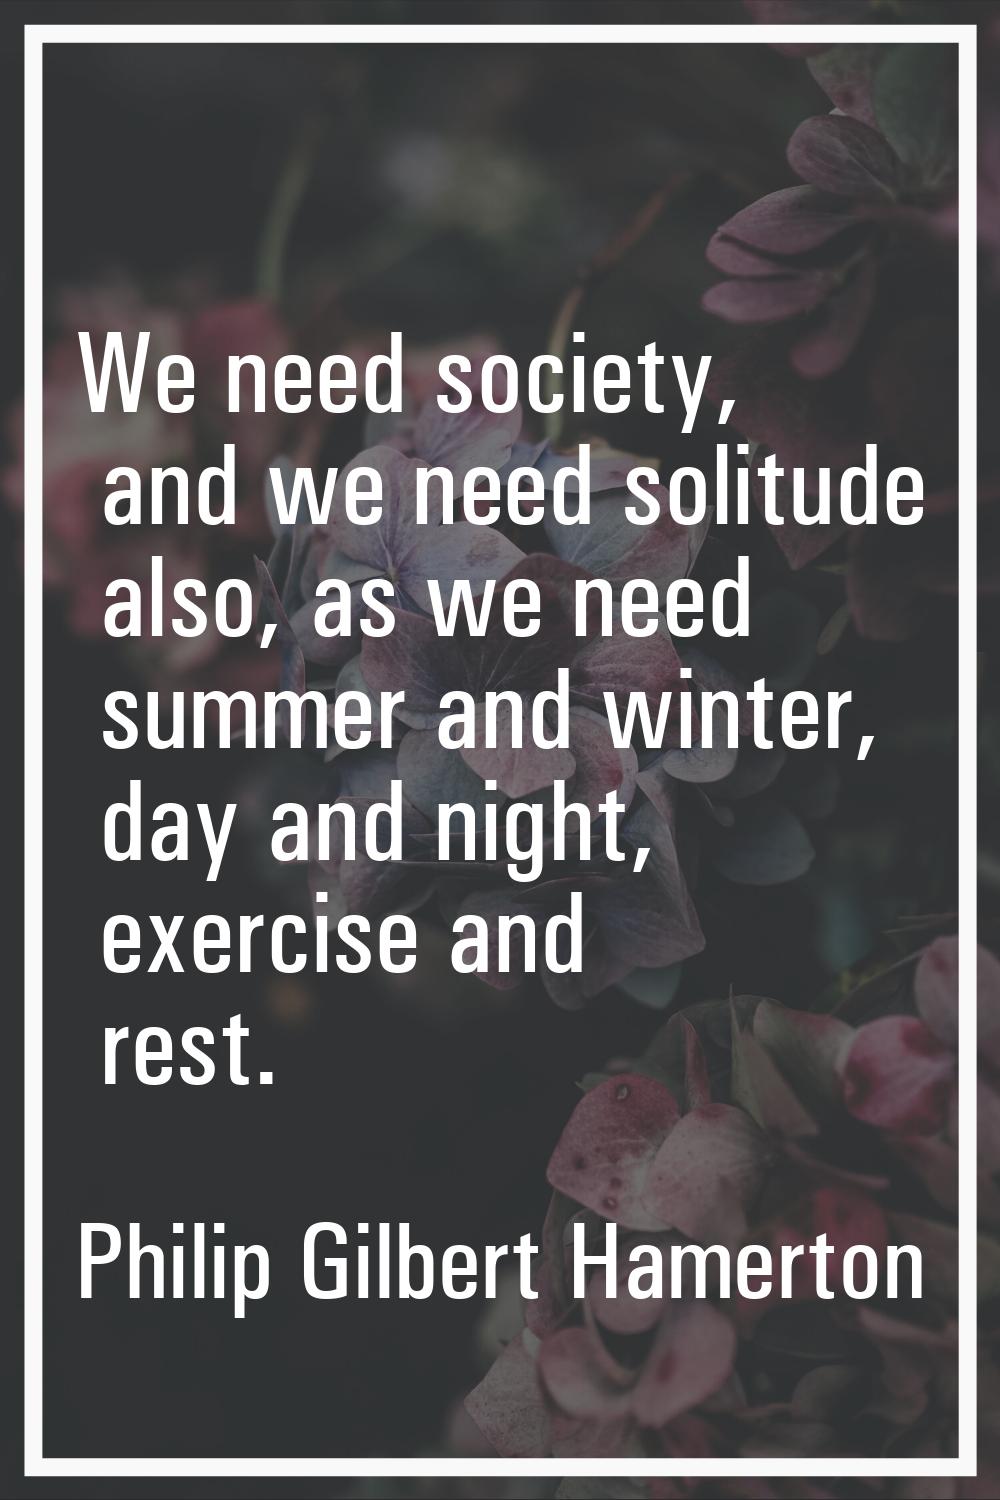 We need society, and we need solitude also, as we need summer and winter, day and night, exercise a